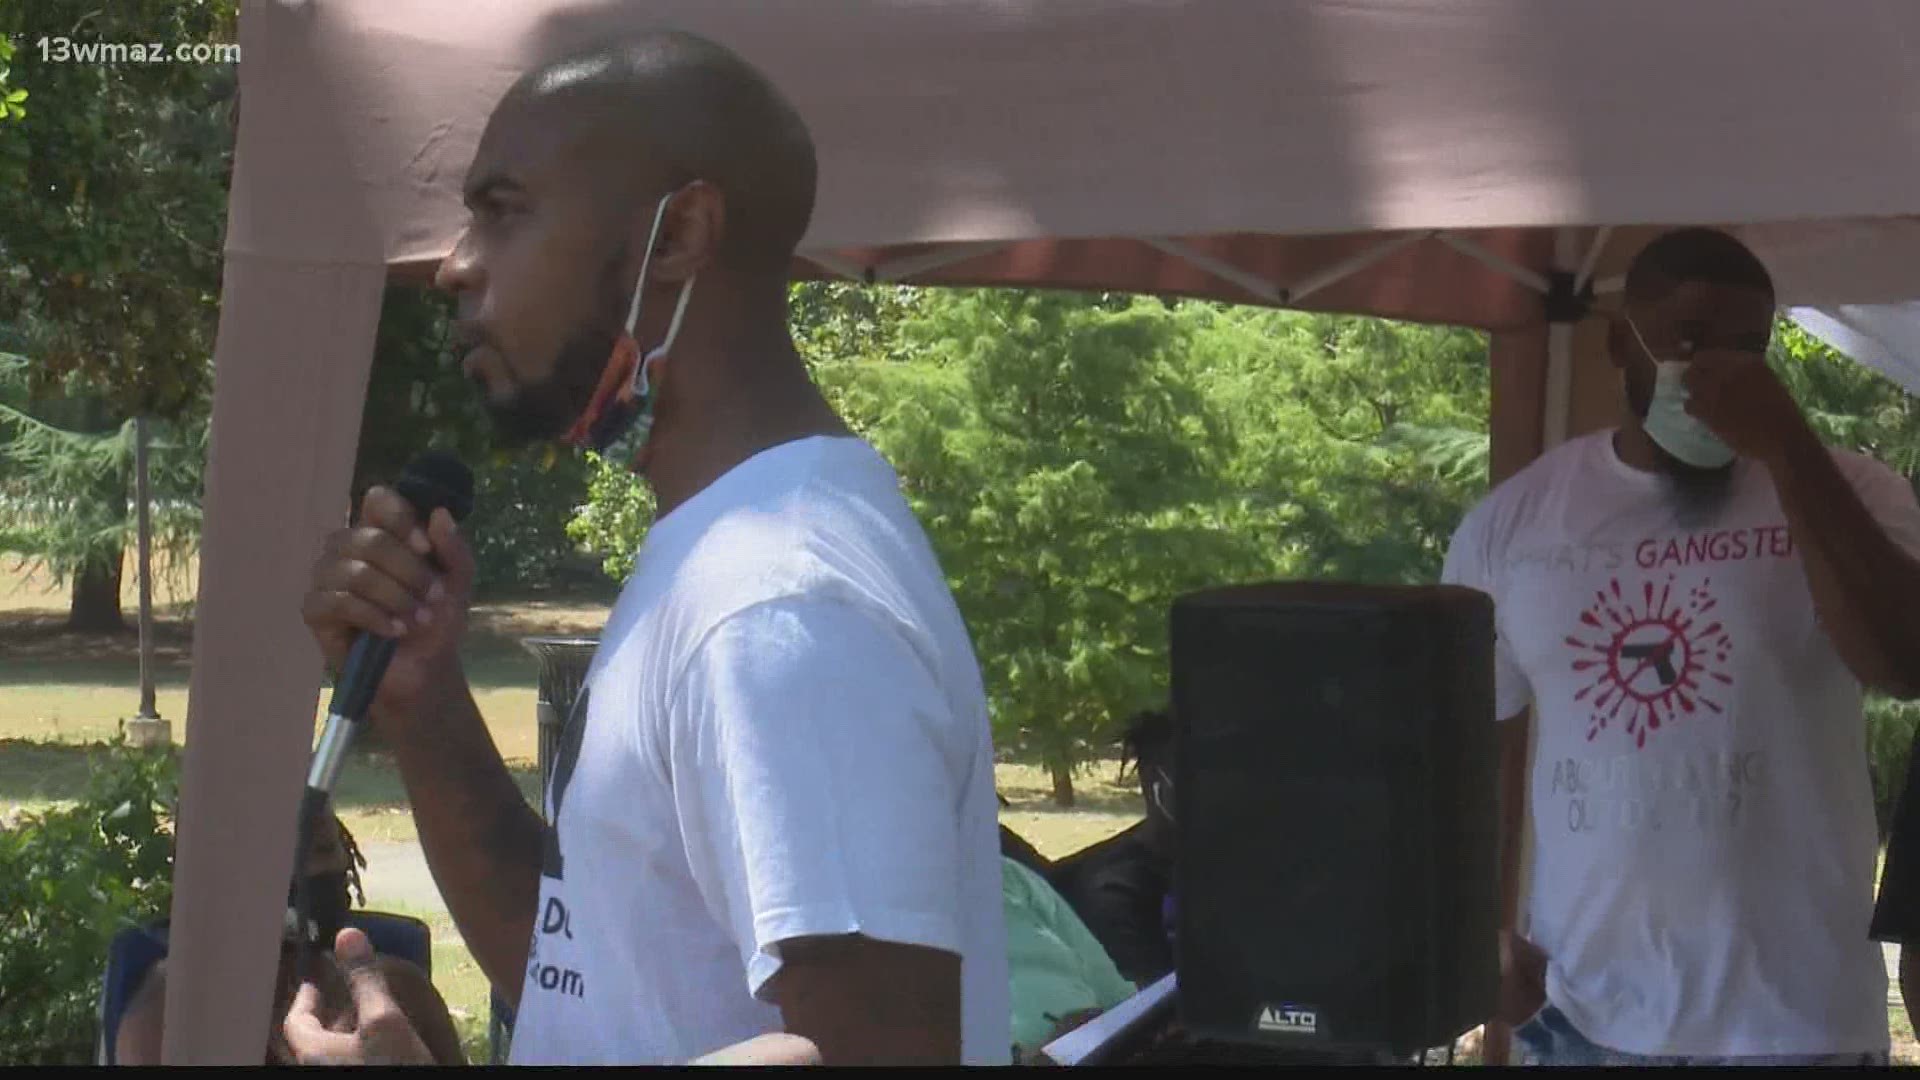 The rally was put together in response to more than 30 homicides in Macon-Bibb County.